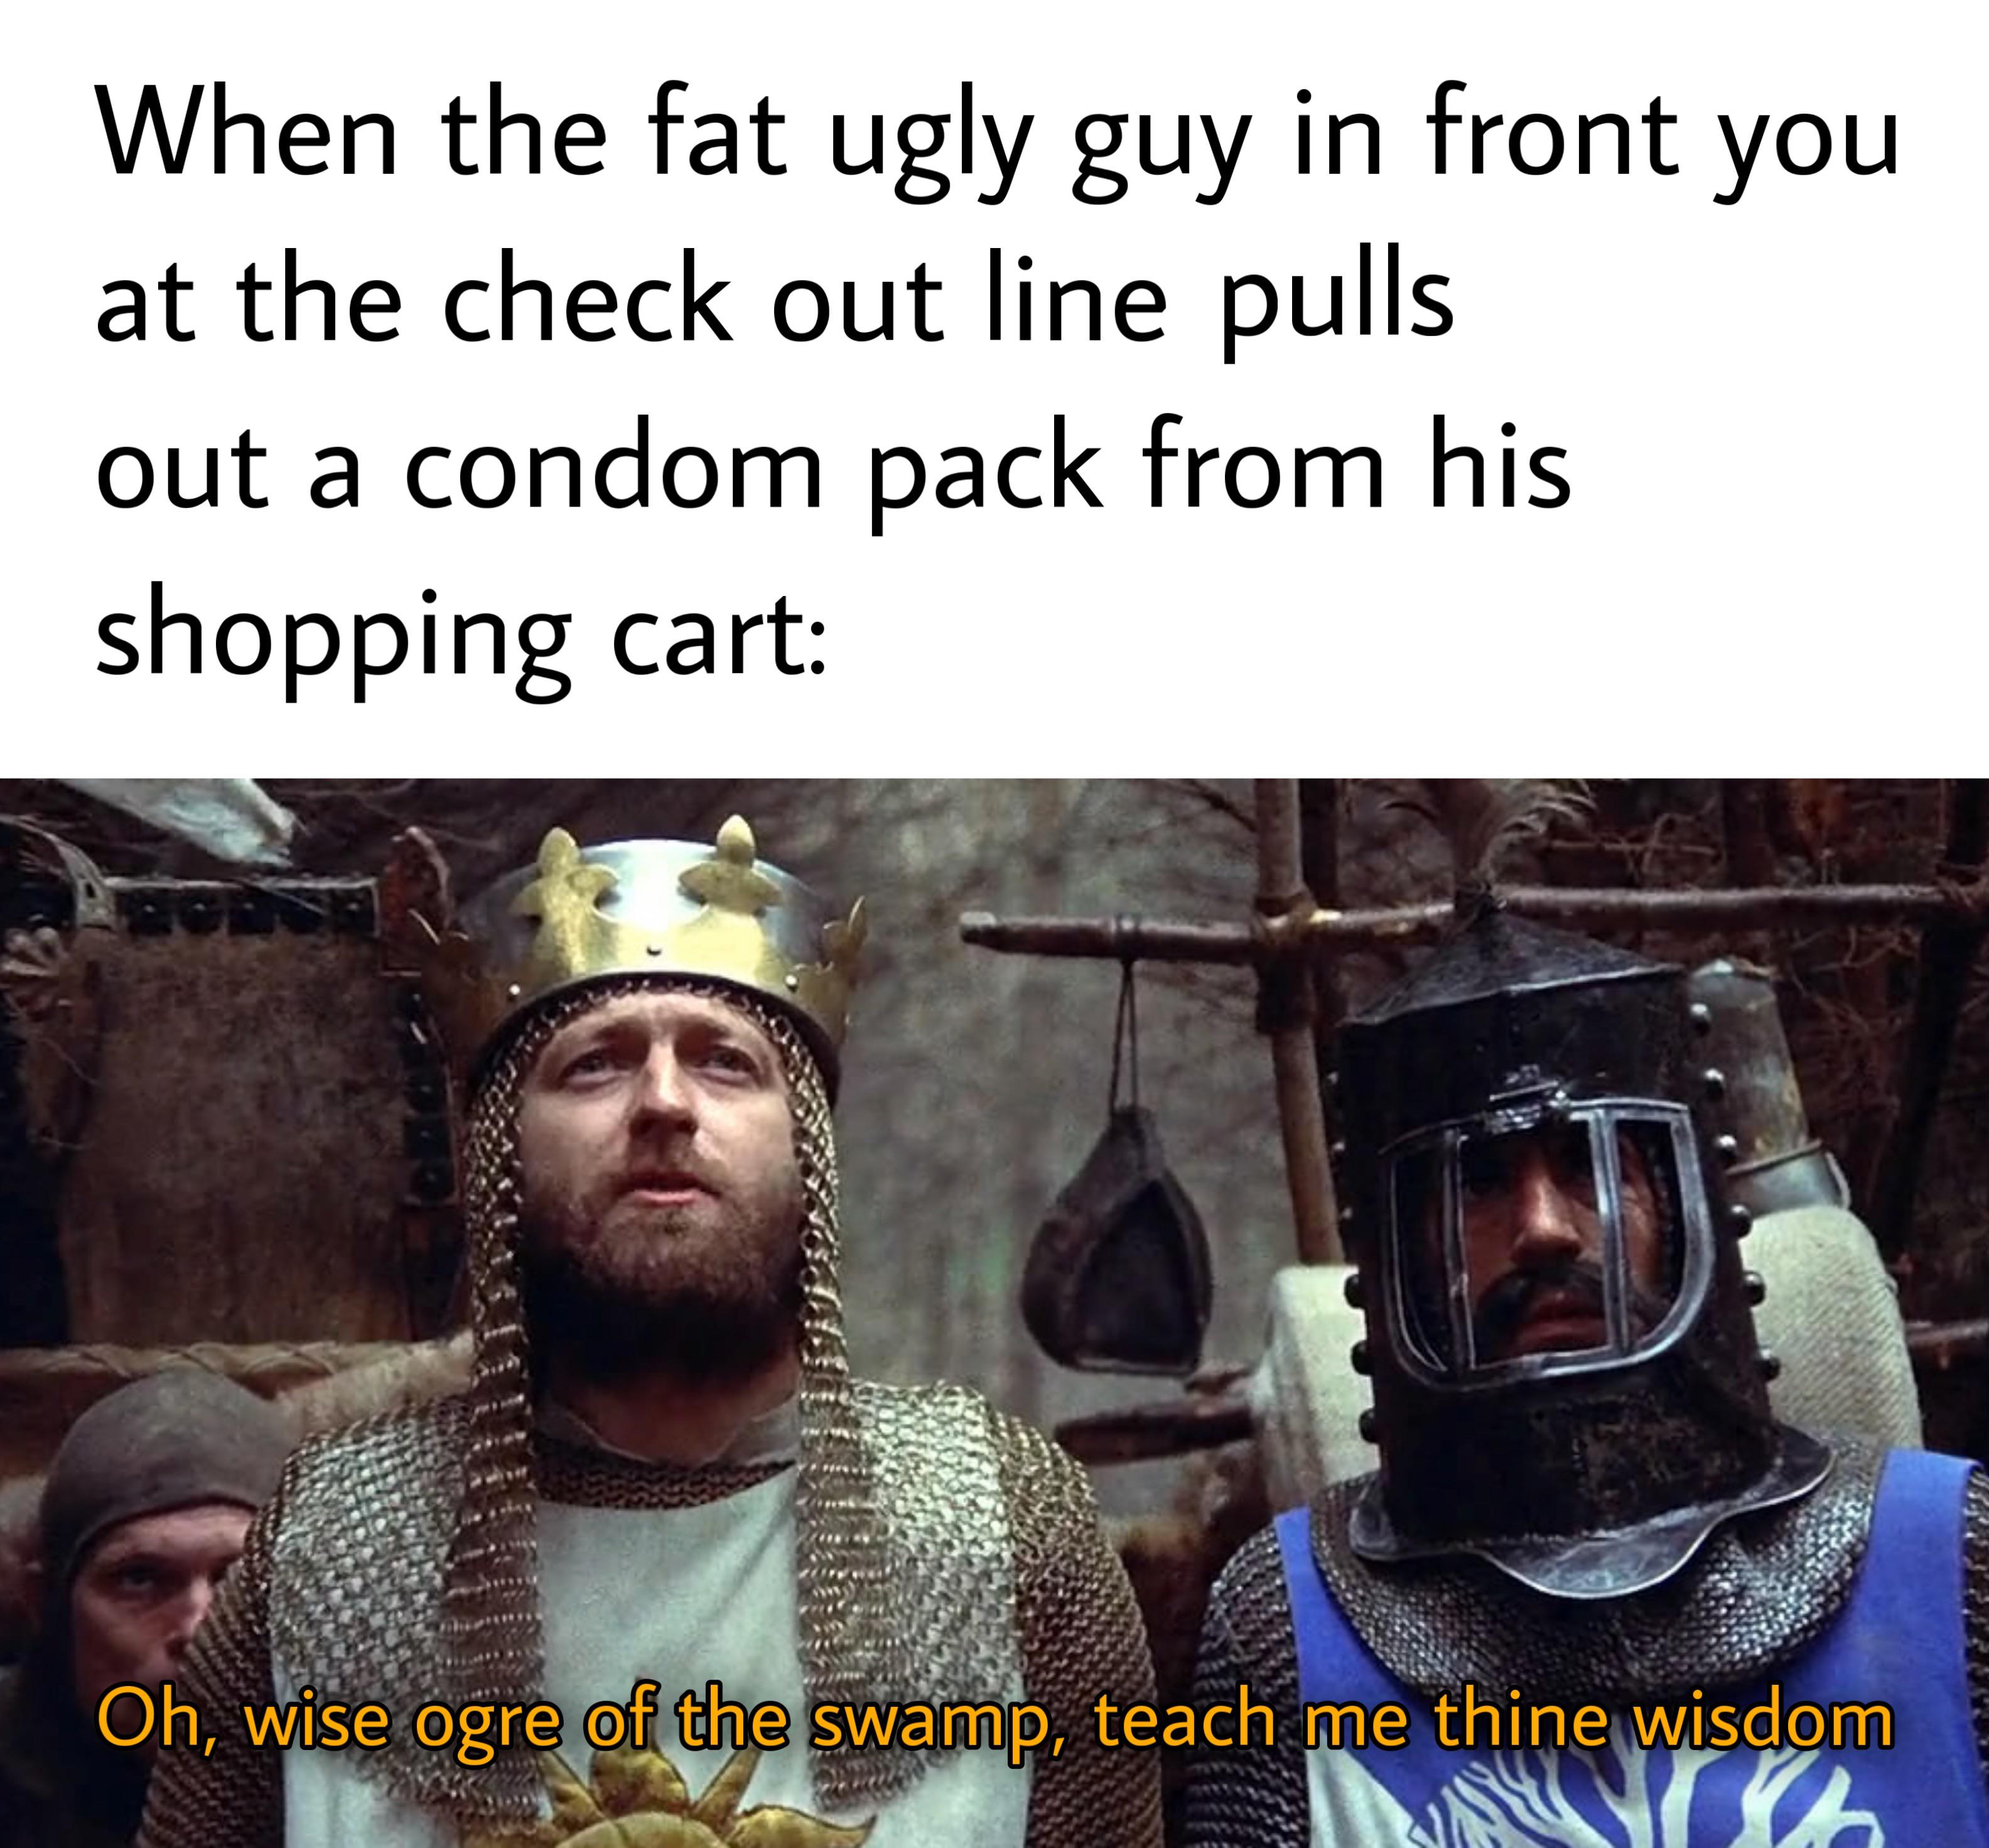 dank memes - monty python and the holy grail arthur - When the fat ugly guy in front you at the check out line pulls out a condom pack from his shopping cart Www Oh, wise ogre of the swamp, teach me thine wisdom Ta